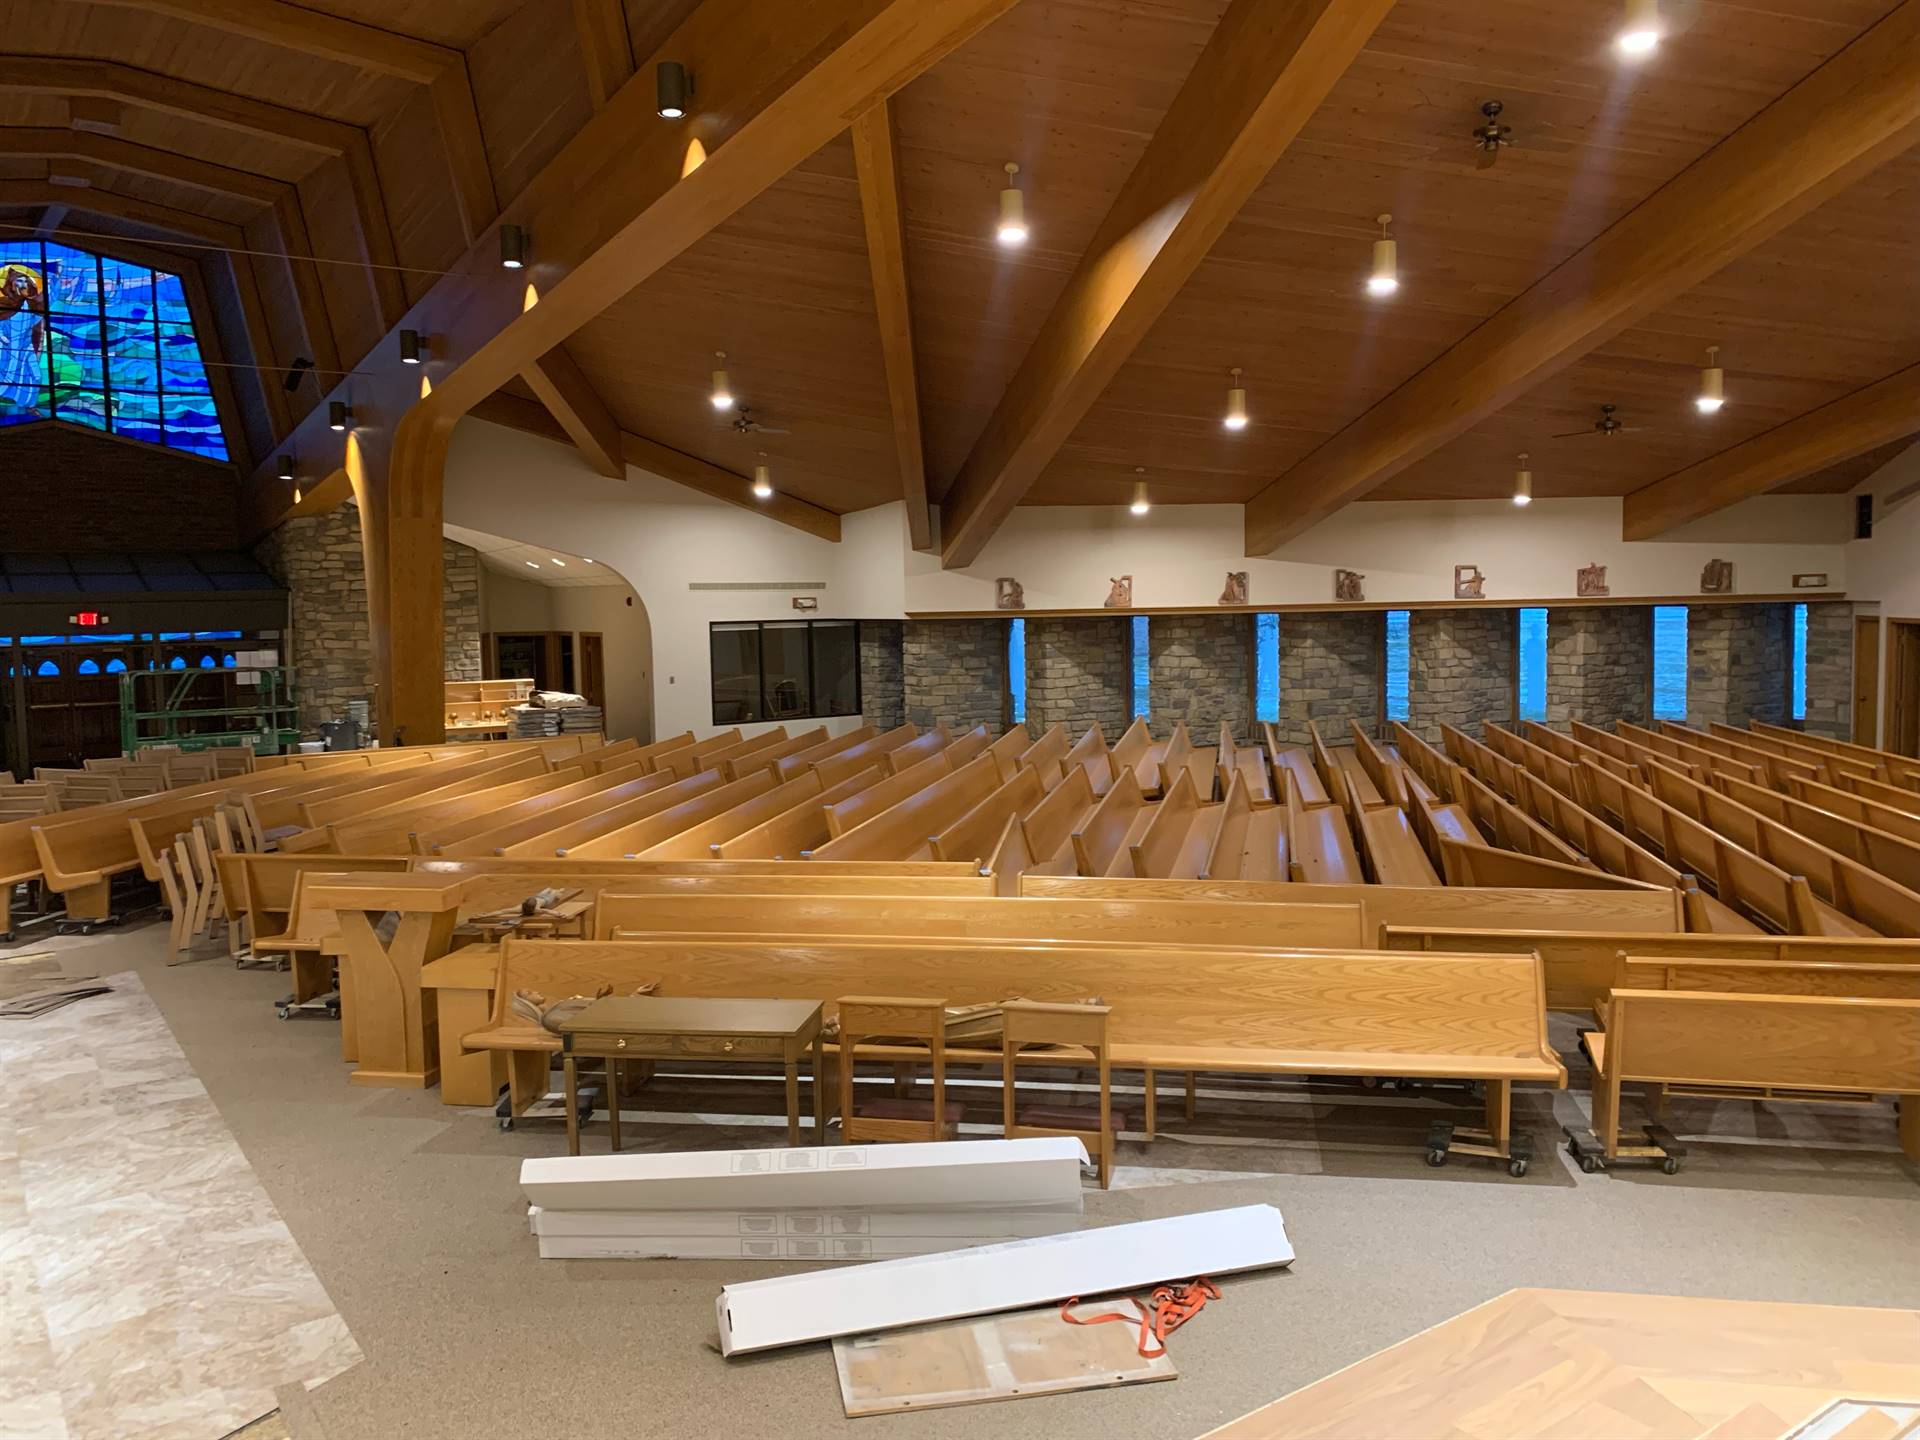 pews are moved to the other side